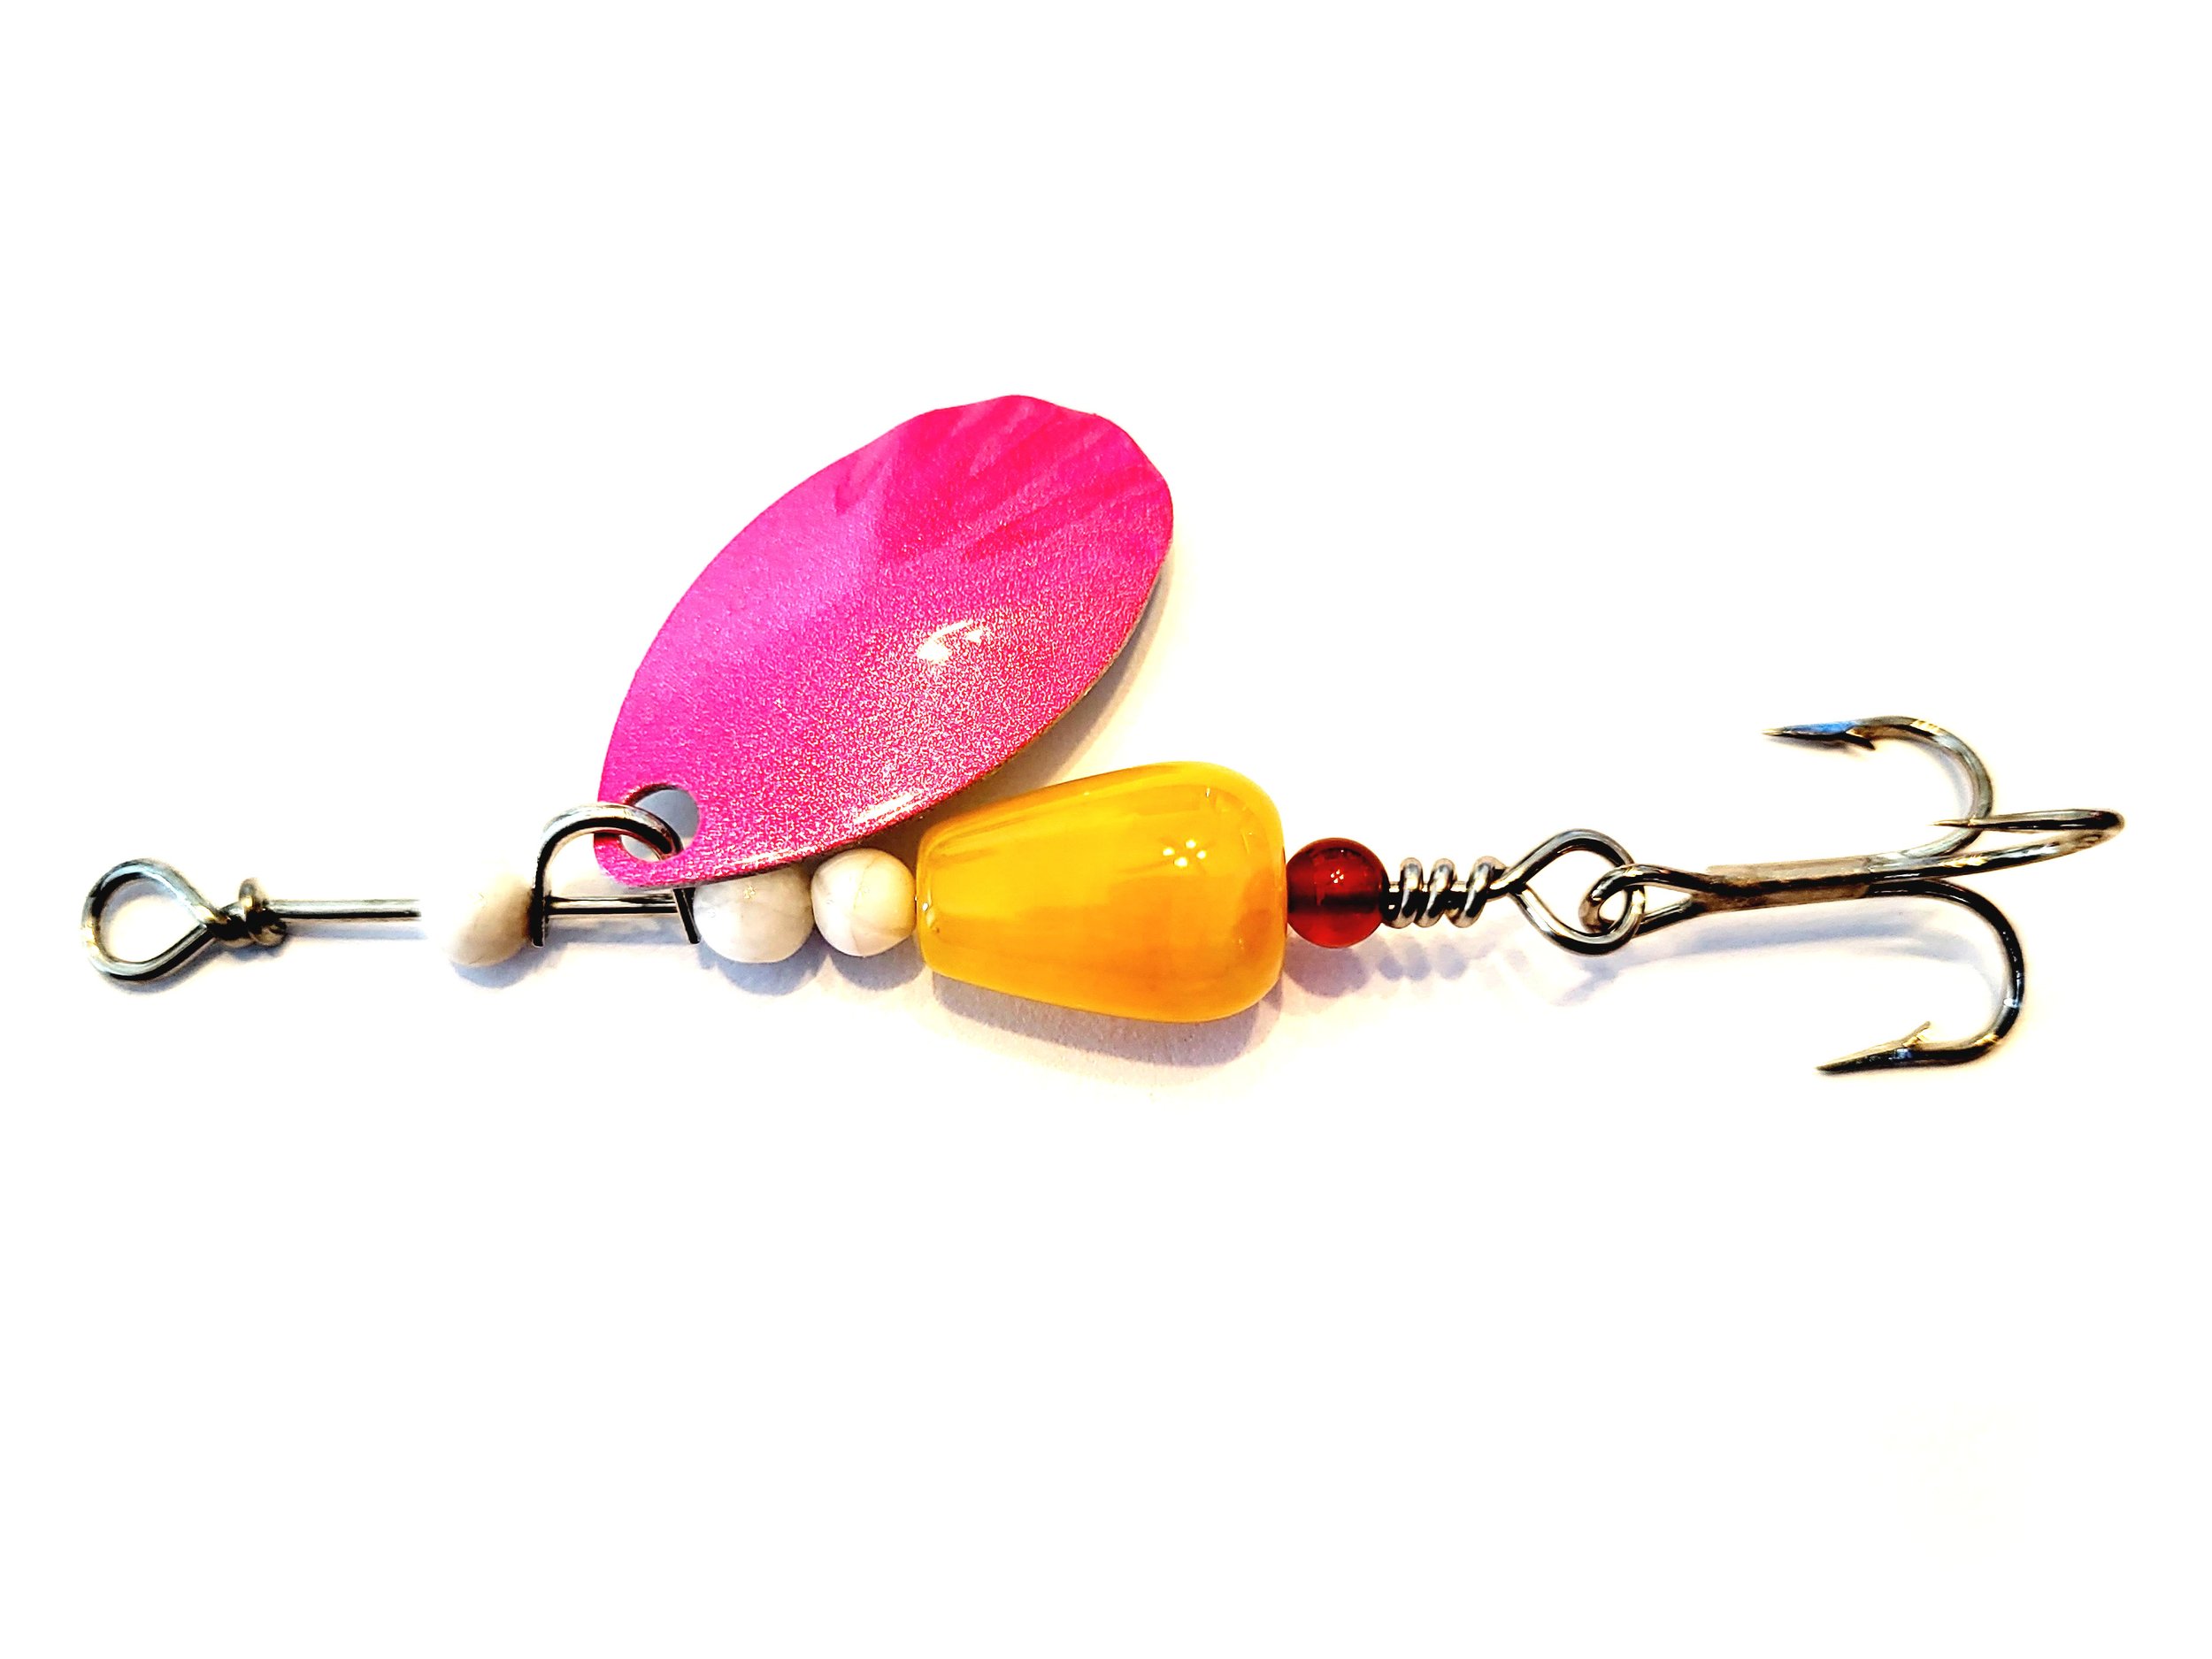 Handmade Spinner Fishing Lure Yellow & Blue W/ Copper-print Blade Inline  Spinner Made in Canada Trout Salmon Bass Pike Perch Walleye 